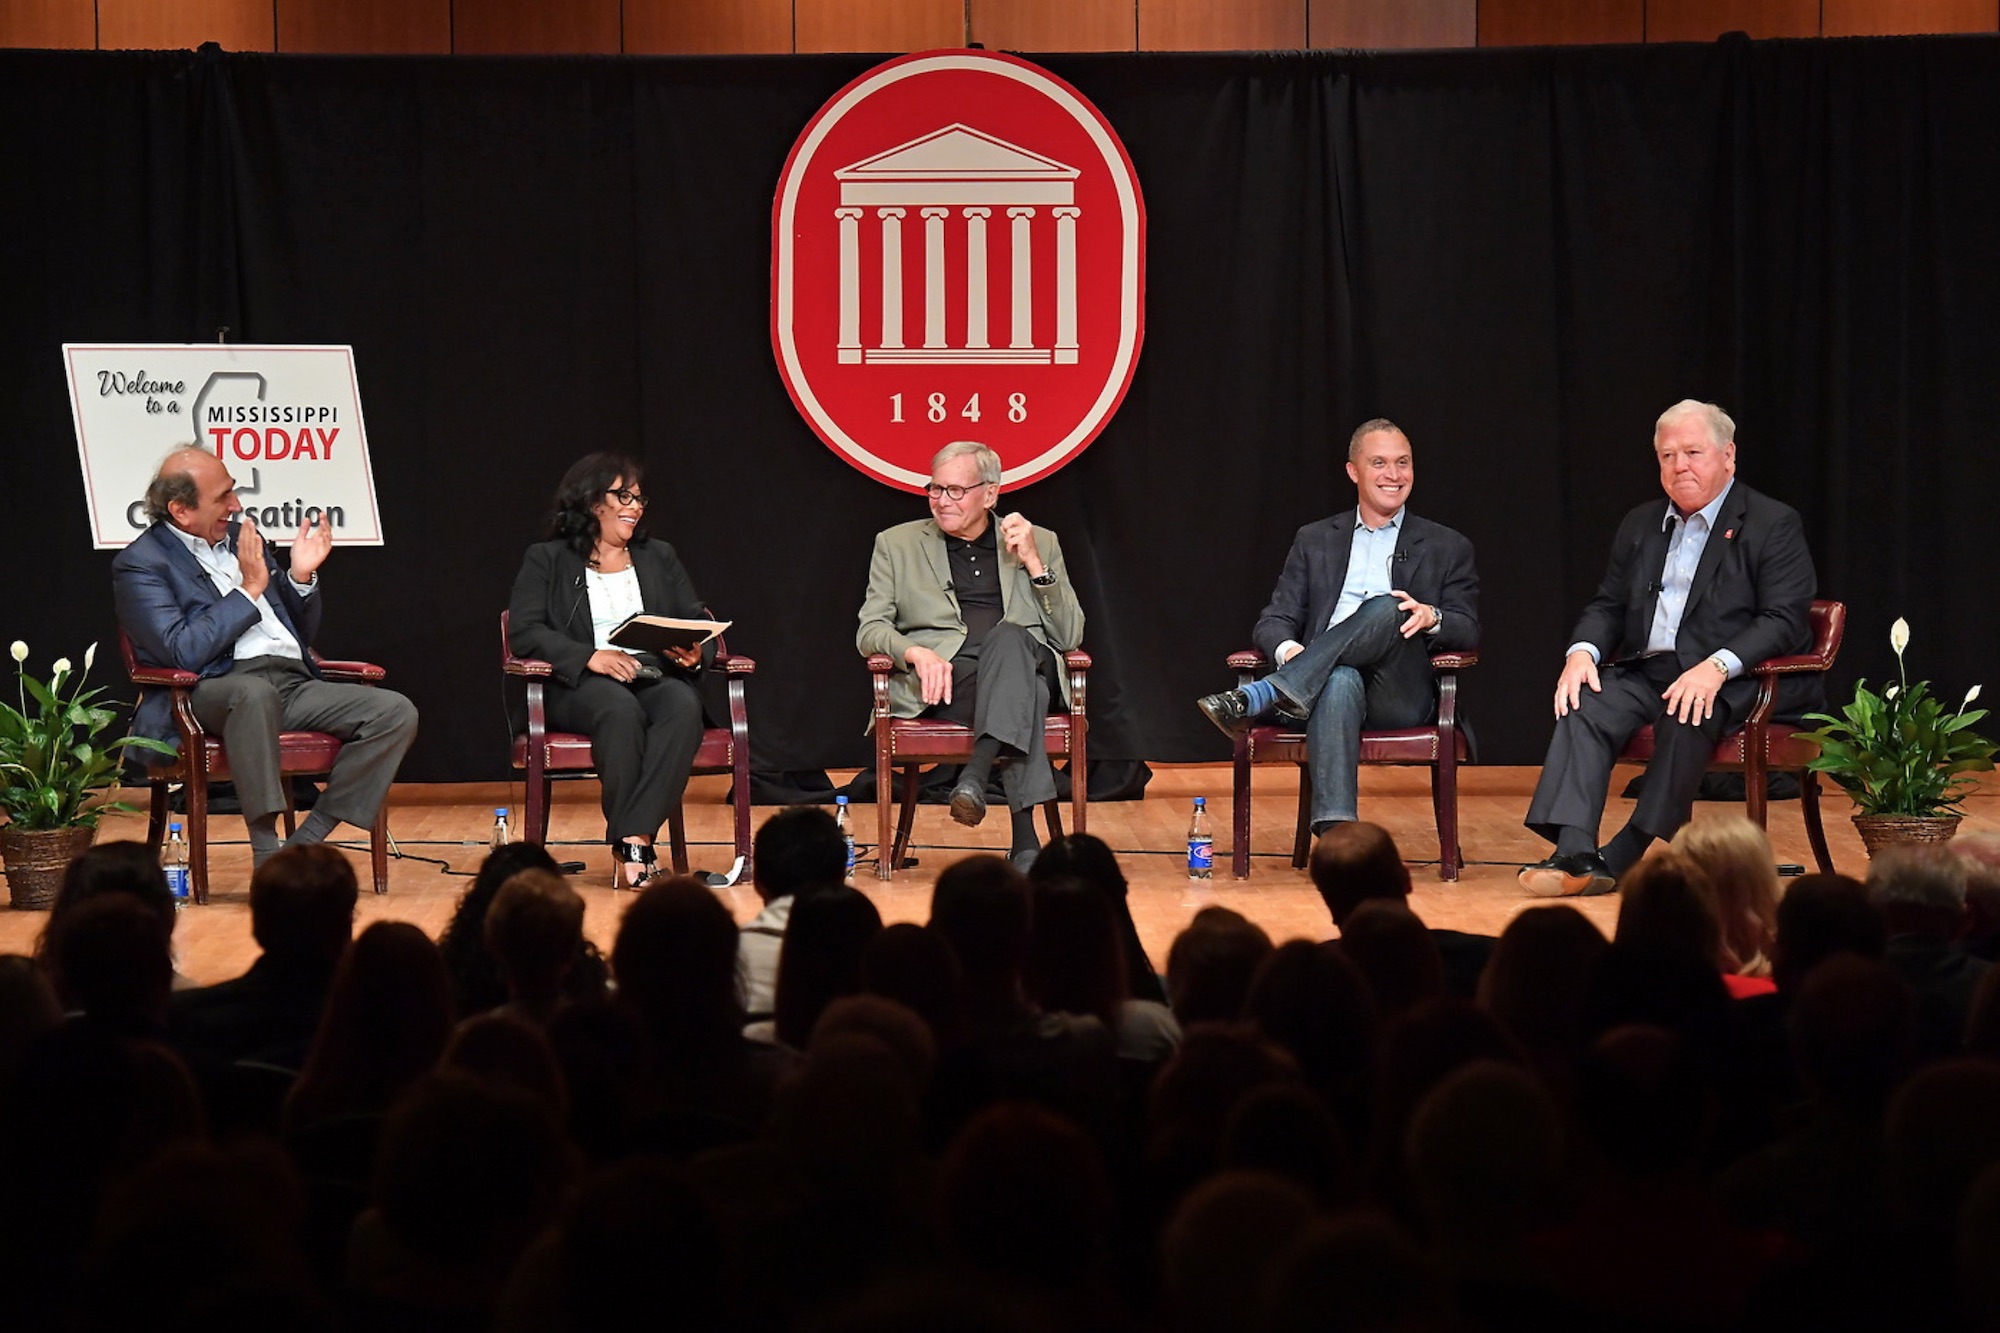 Andrew Lack, Maggie Wade, Tom Brokaw, Harold Ford Jr. and Haley Barbour on the Overby Center stage